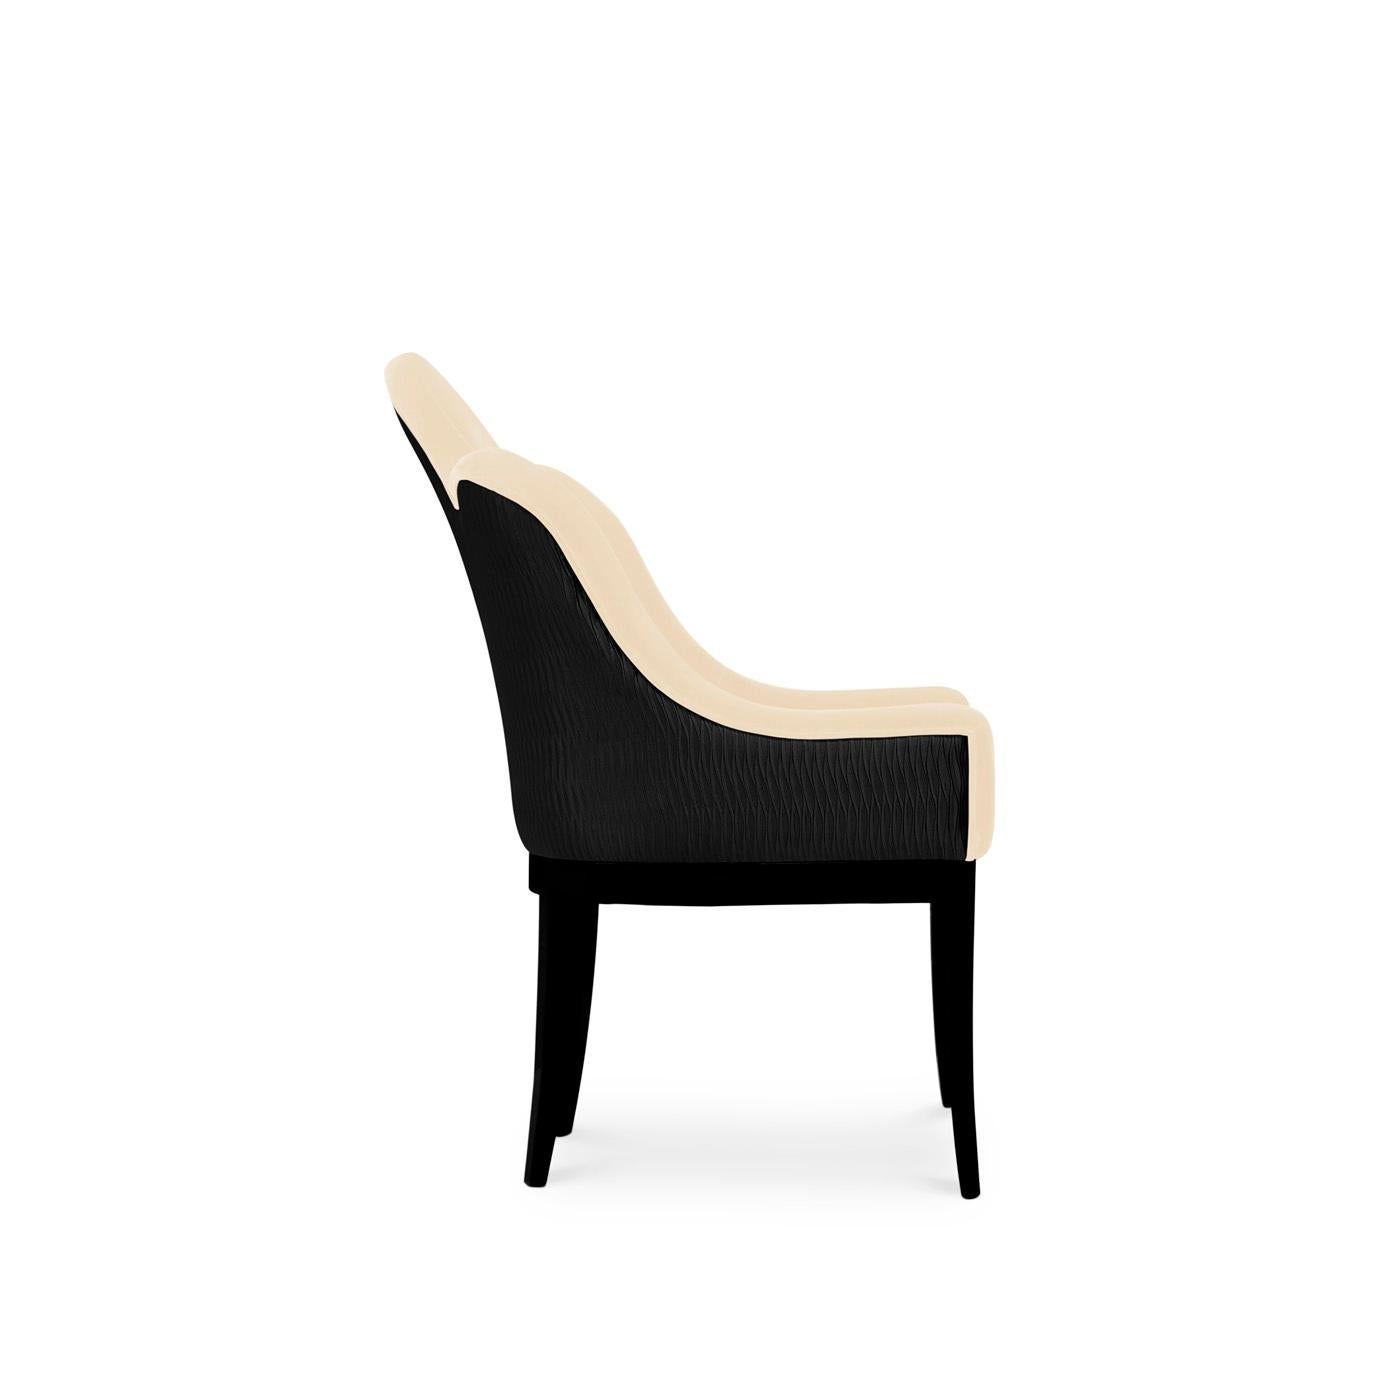 Add a daringly stylish essence to your dining room design with the audacious Anastasia dining chair. She surpasses the traditional elegance of a fully upholstered dining chair with the modern allure created by the luxurious curves and bold lines